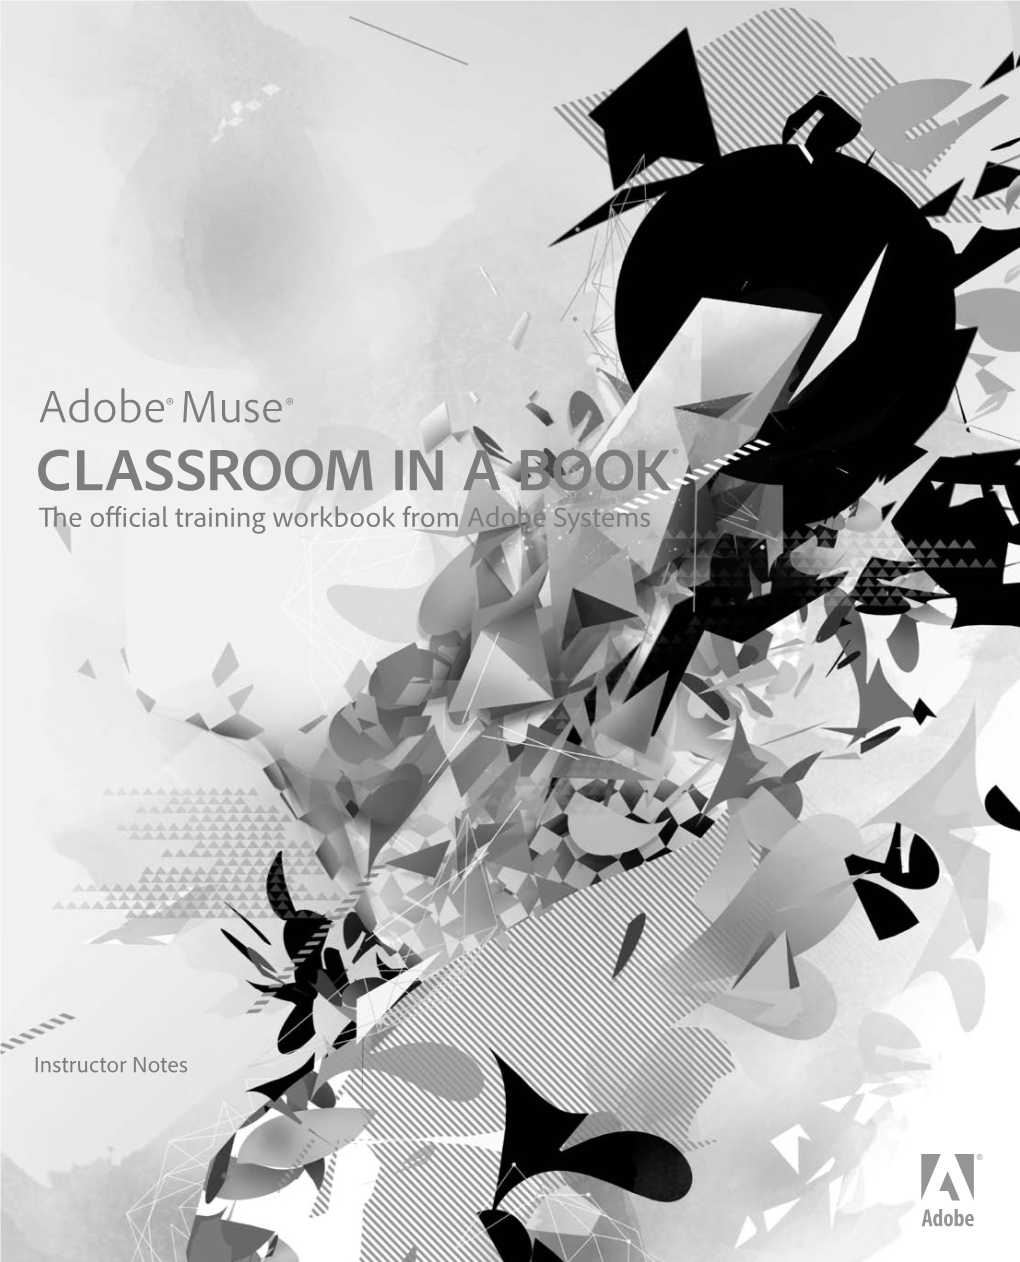 Adobe Muse Classroom in a Book, ©2013 Adobe Systems